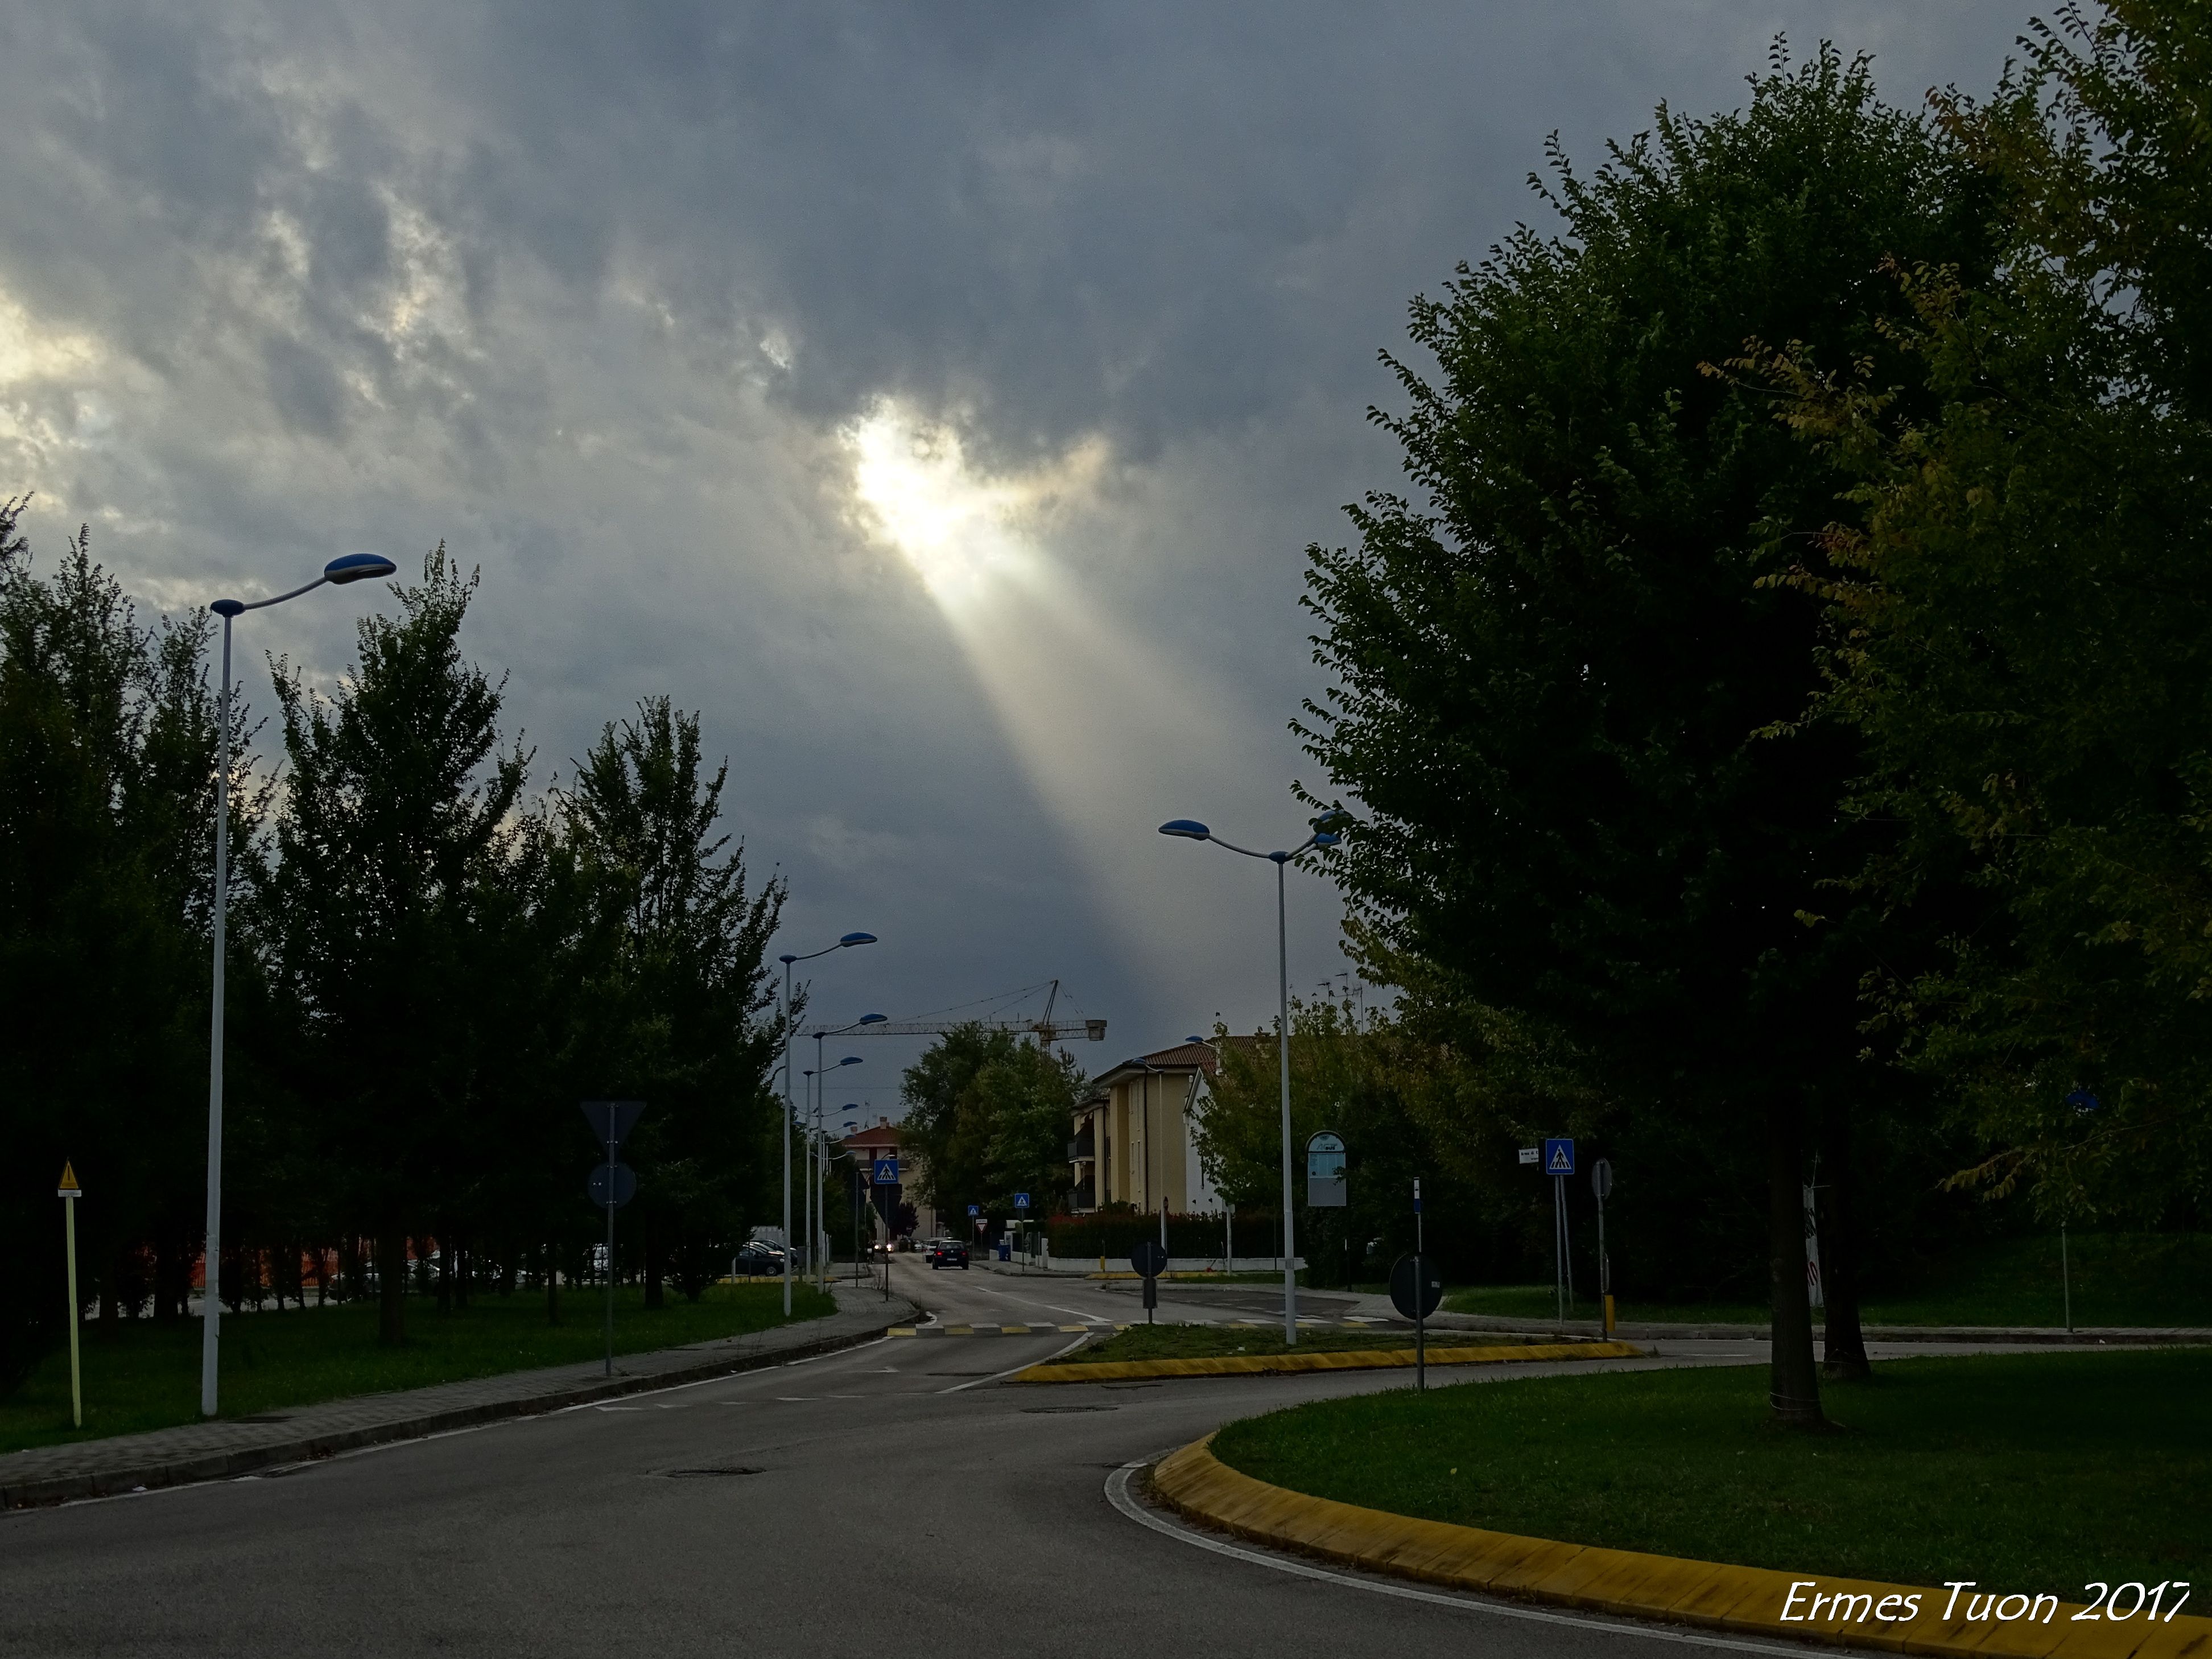 Caption: A ray of sun is trepassiong the clouds, after an heavy rain -  Local Guide @ermest